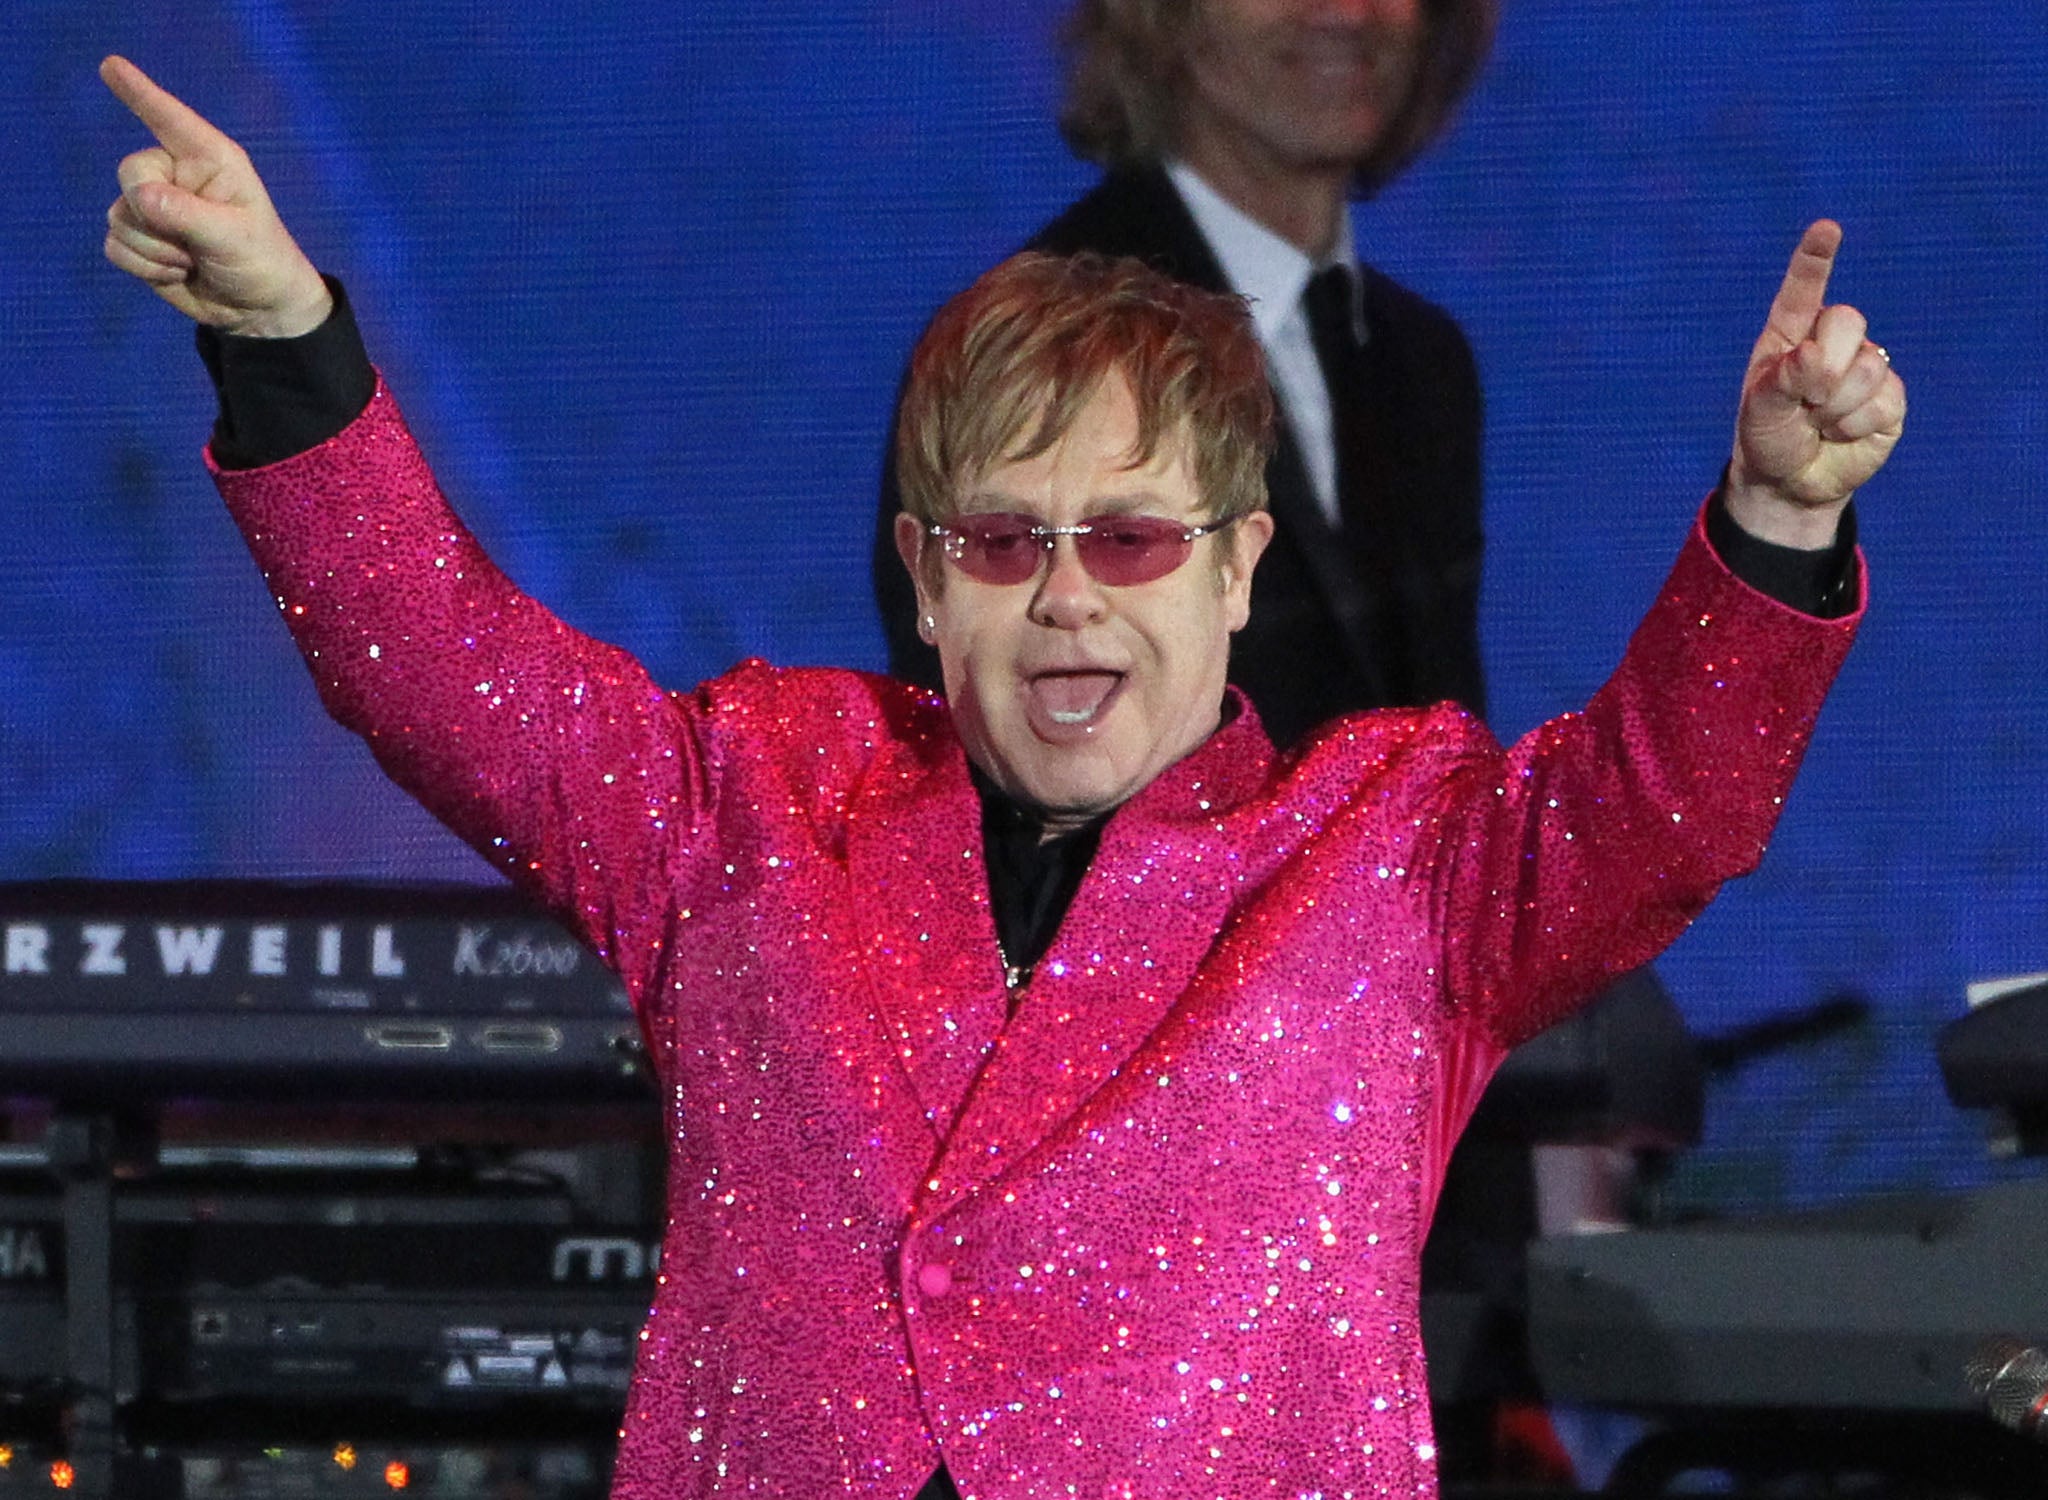 Elton John is scheduled to perform in Russia this weekend by anti-gaw laws may stop him